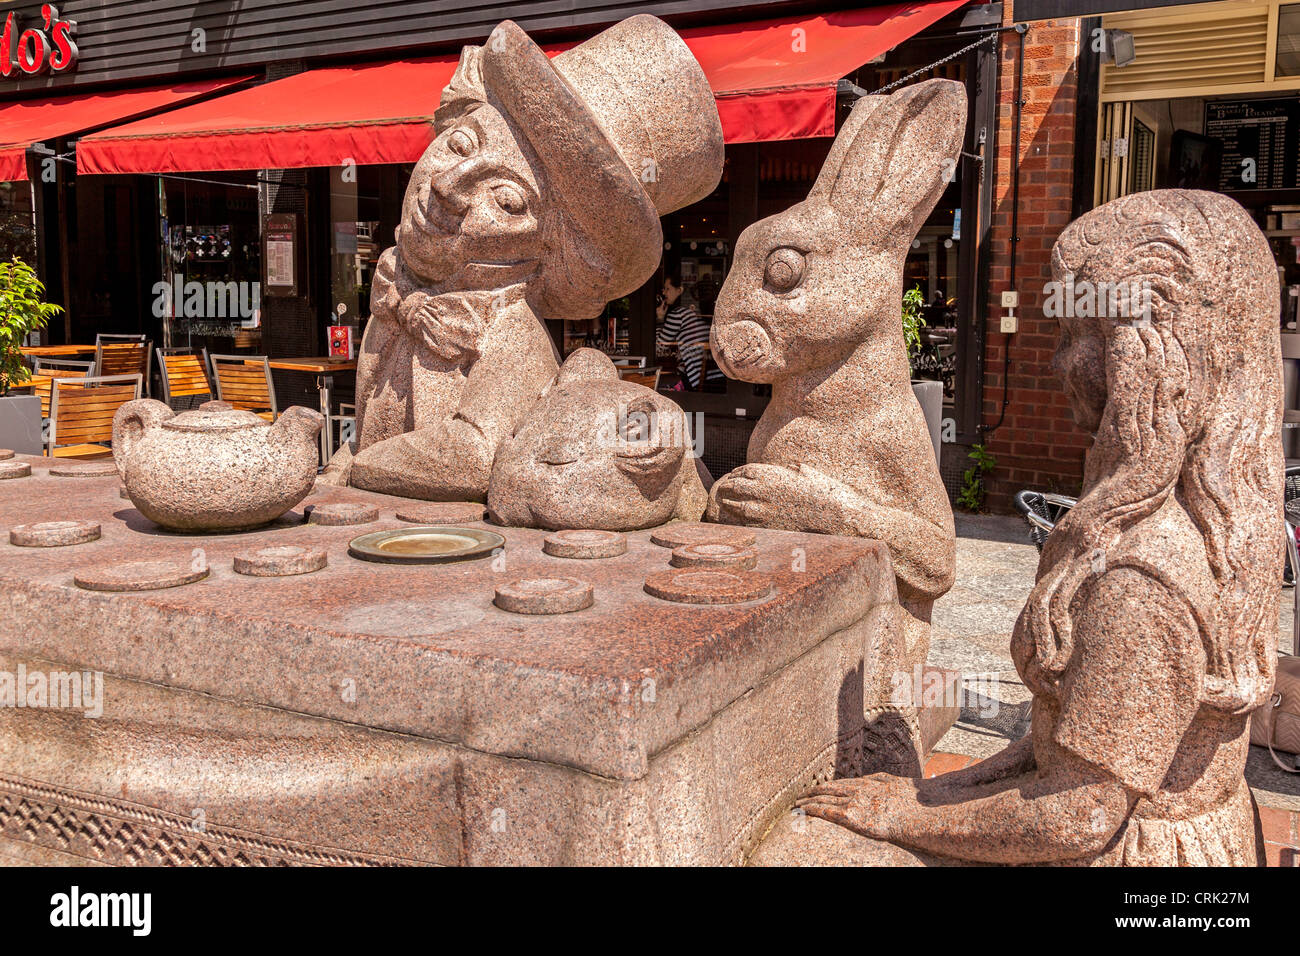 The Mad Hatter's Tea Party depicted in a statue in Golden Square Warrington shopping centre. Stock Photo